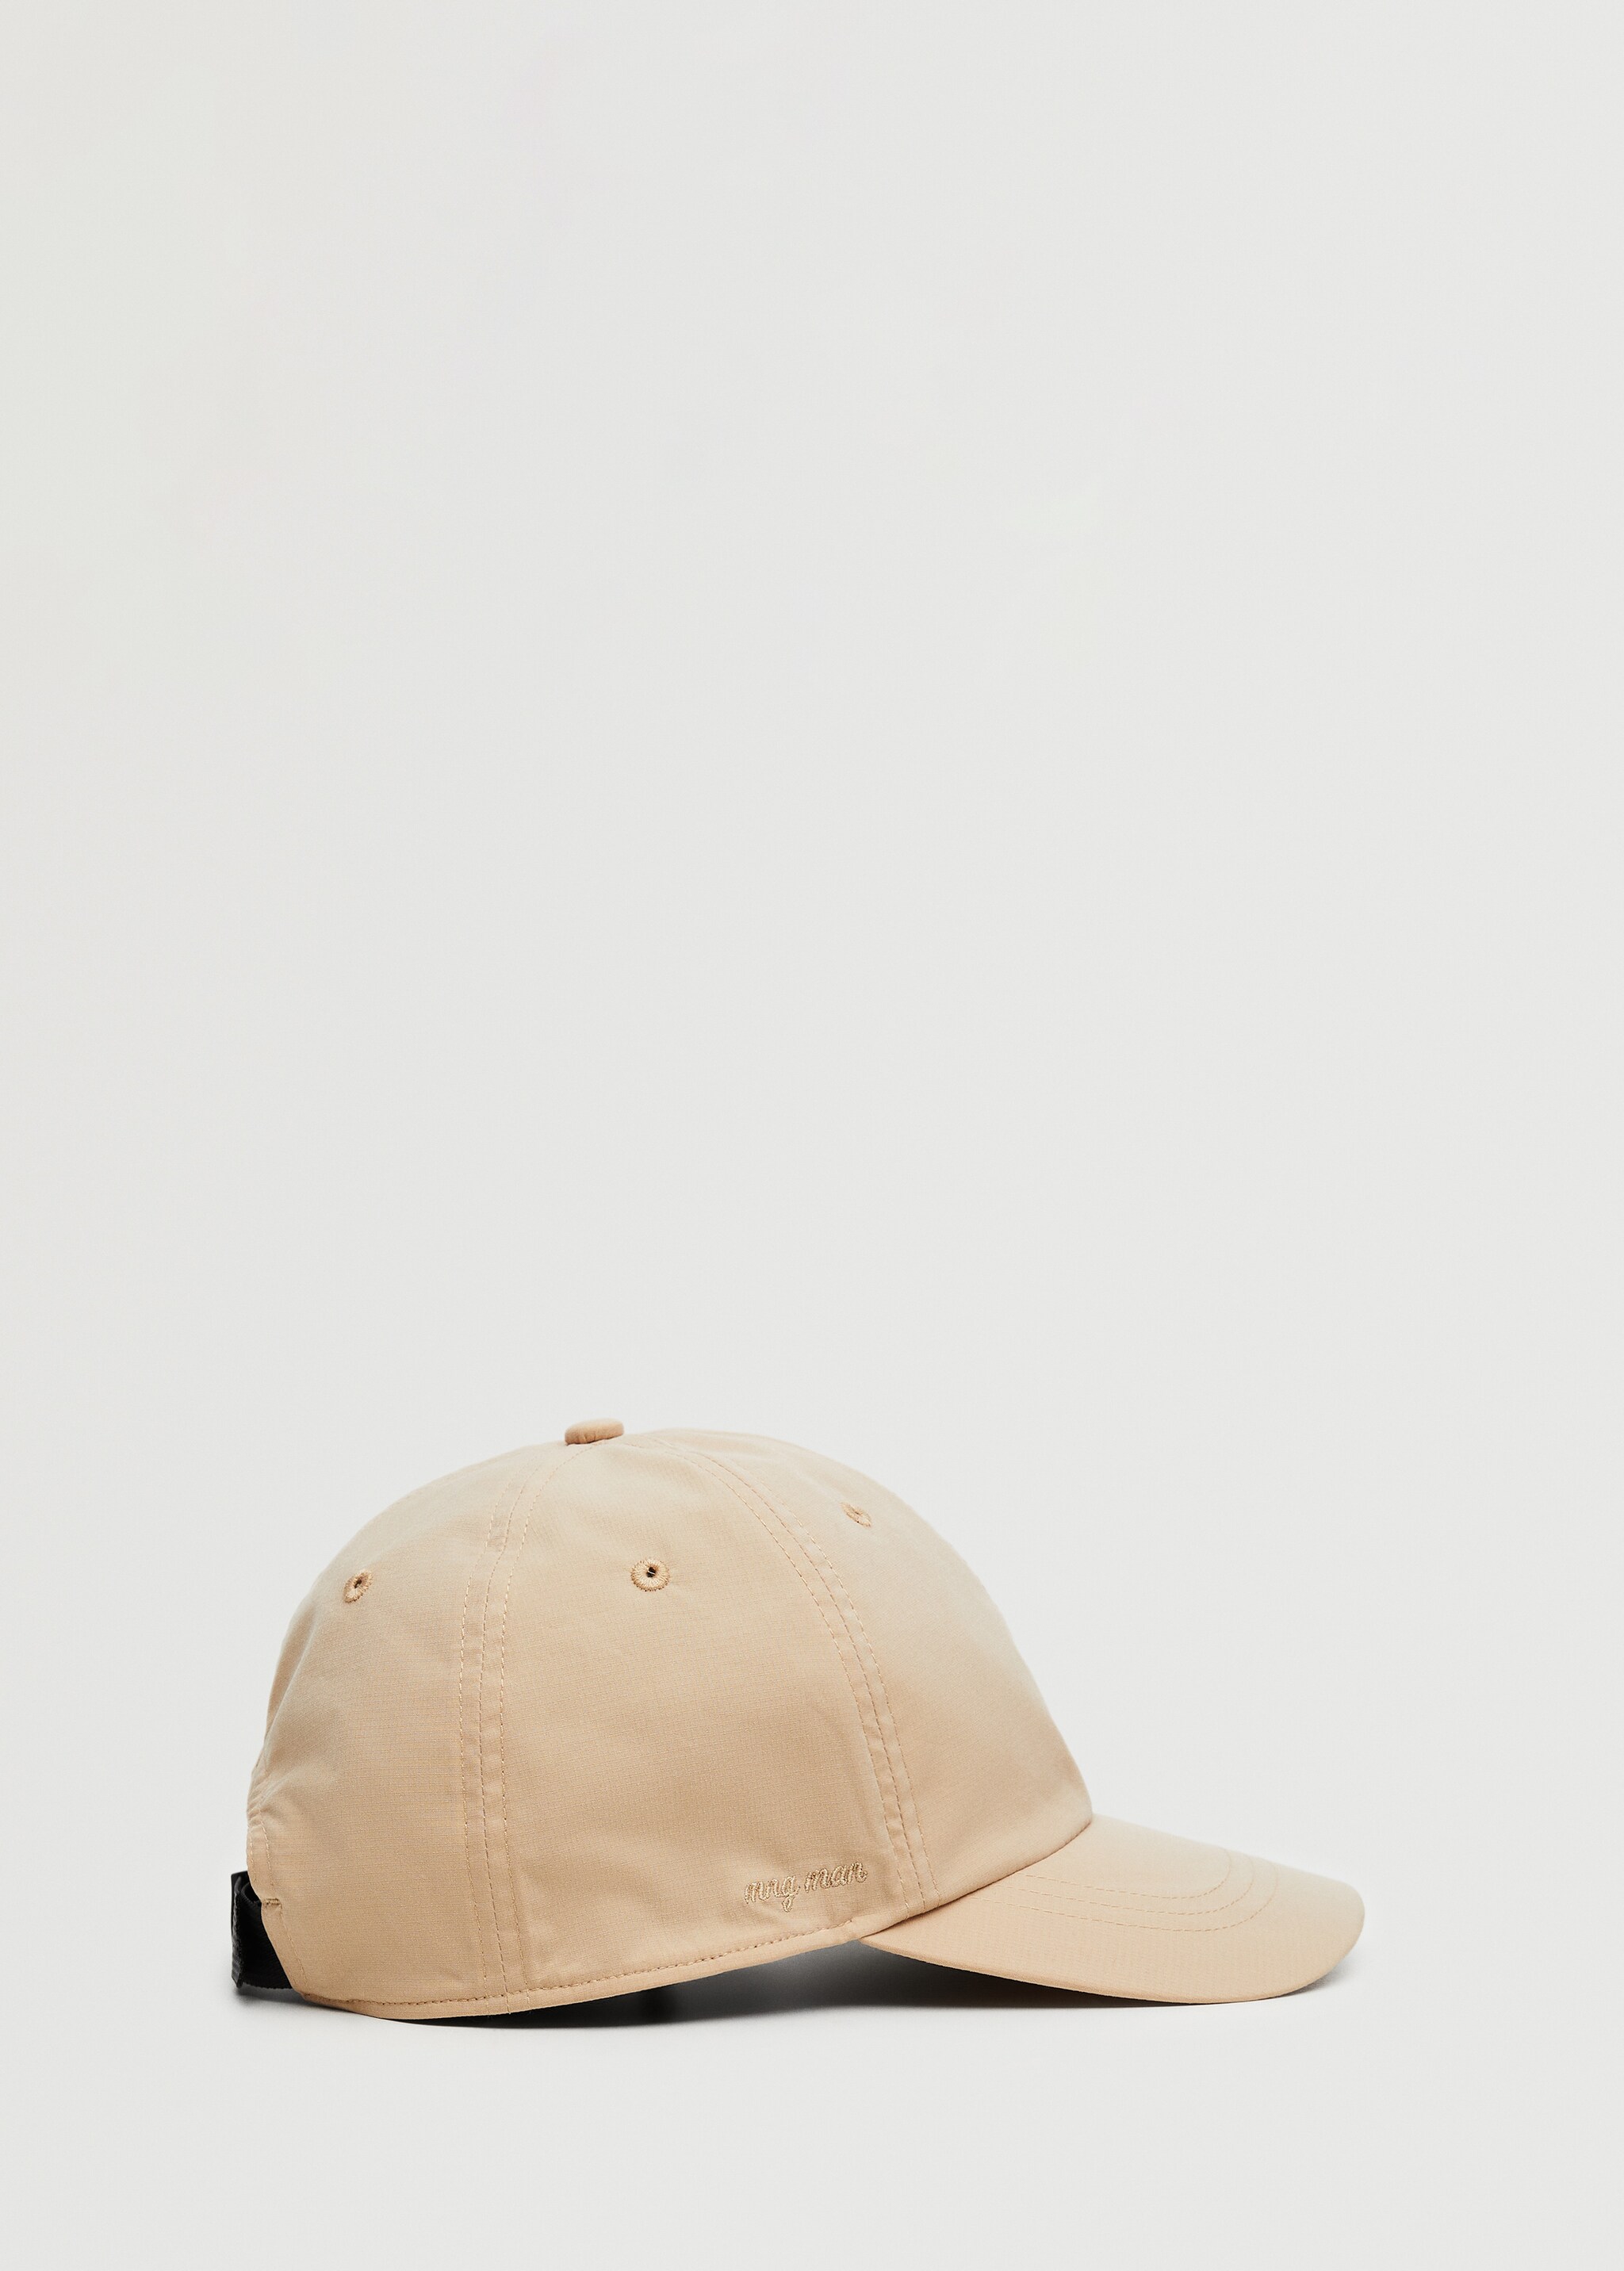 Baseball cap - Article without model